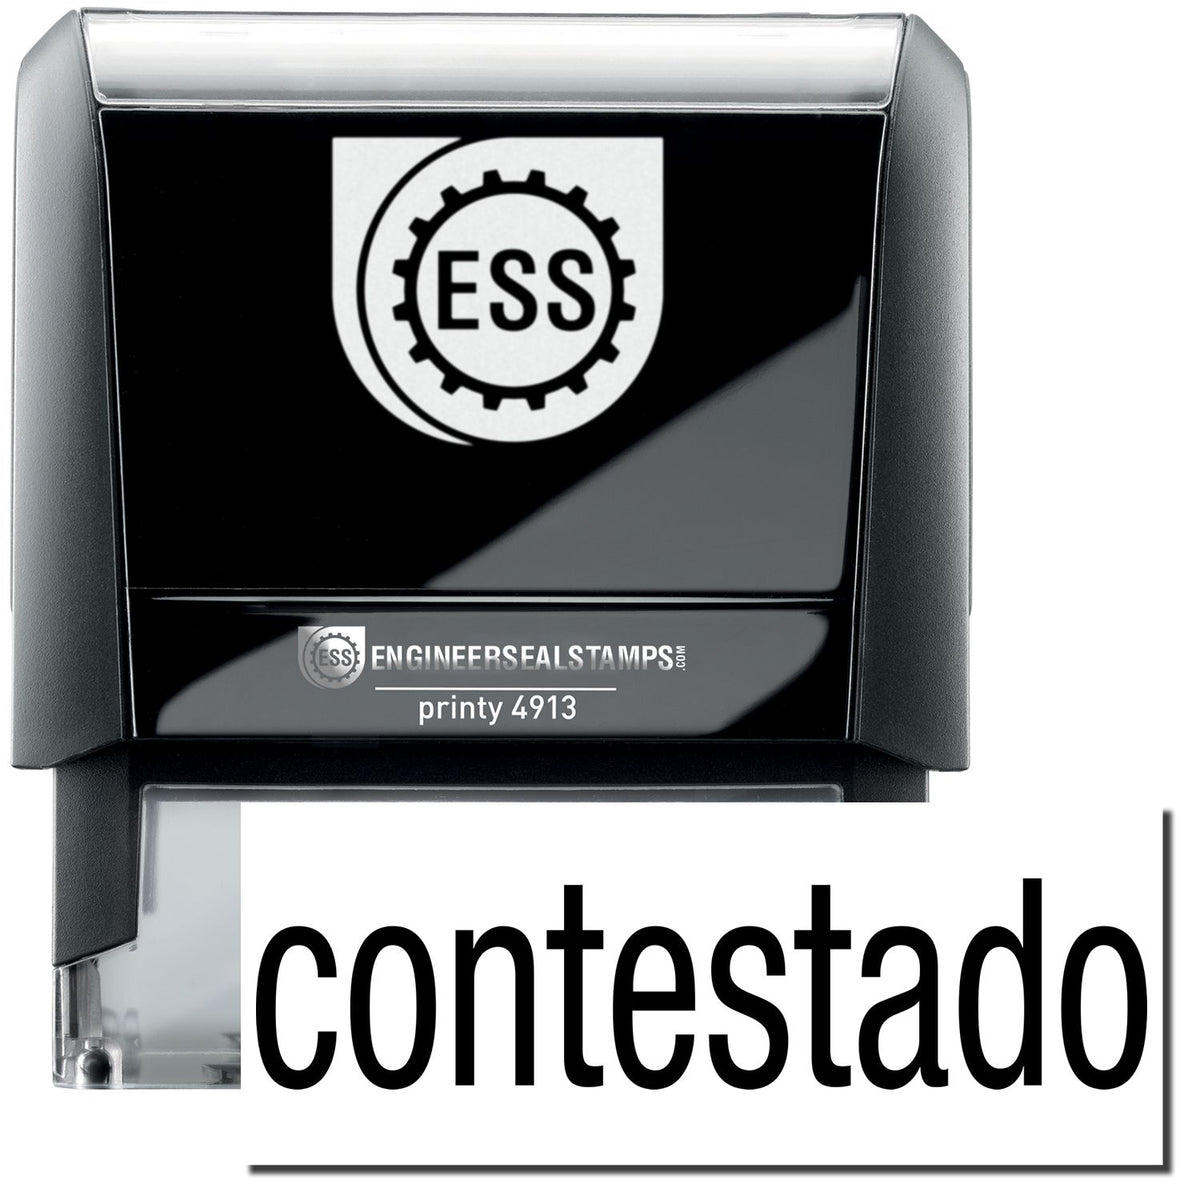 A self-inking stamp with a stamped image showing how the text &quot;contestado&quot; in a large font is displayed by it after stamping.